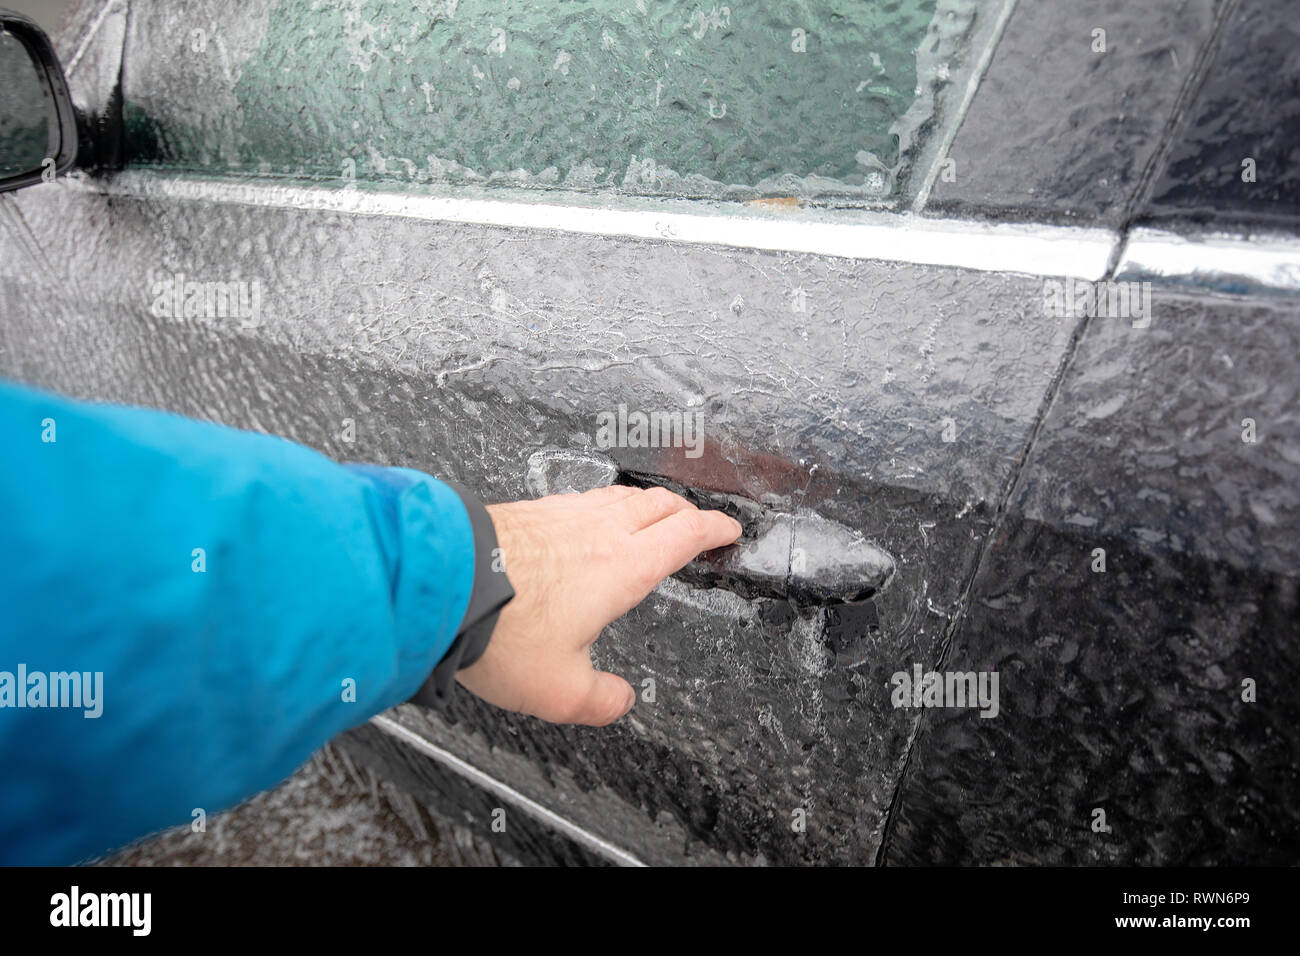 Transportation, winter, weather, vehicle concept. Hand on Car's door handle covered in snow and icy rain in winter. Blizzard Snowfall icy rain for wea Stock Photo